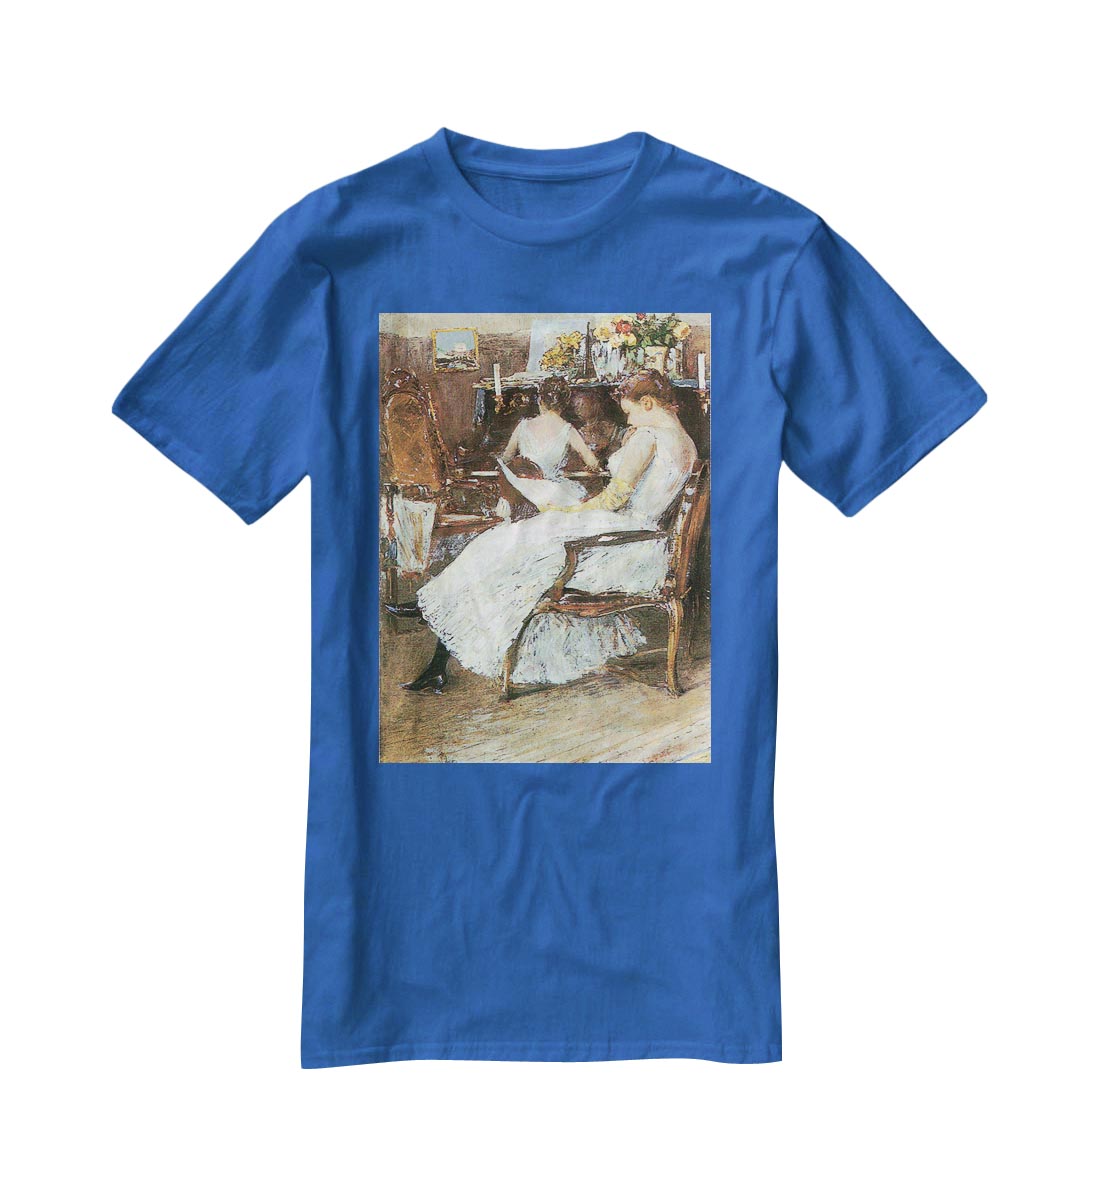 Mrs. Hassam and her sister by Hassam T-Shirt - Canvas Art Rocks - 2